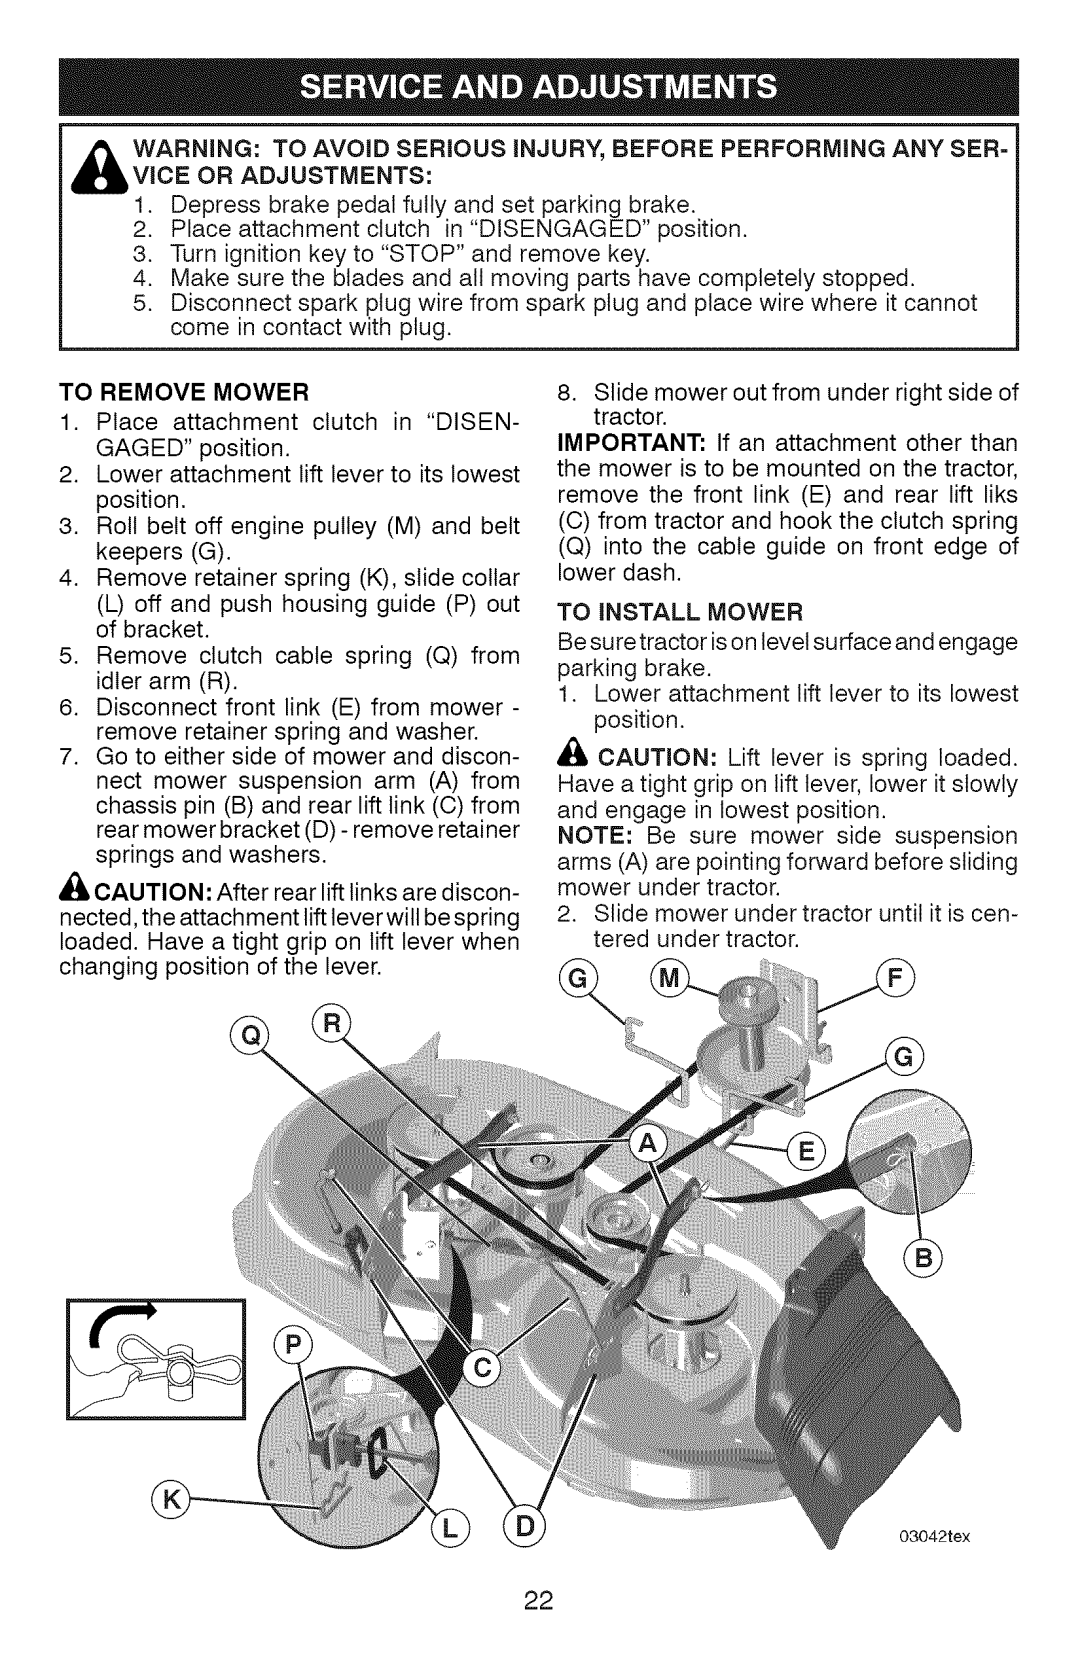 Craftsman 917.28927 manual Vice Or Adjustments, To Remove Mower, TO iNSTALL MOWER 